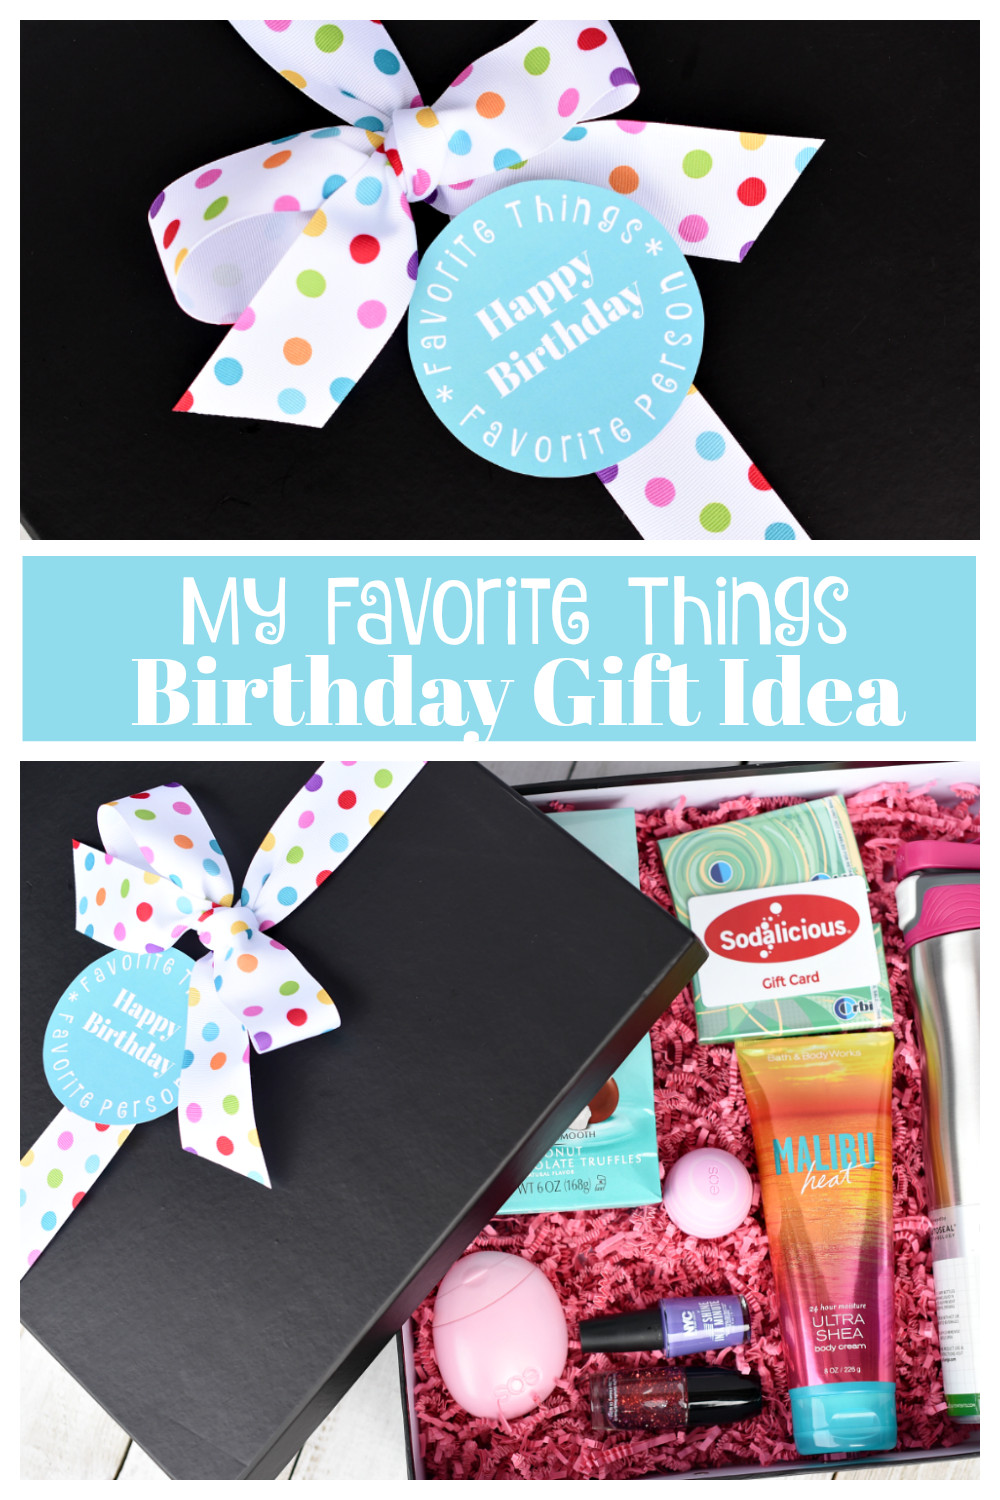 Best Friend Gift Ideas Pinterest
 My Favorite Things Birthday Gifts for Your Best Friend